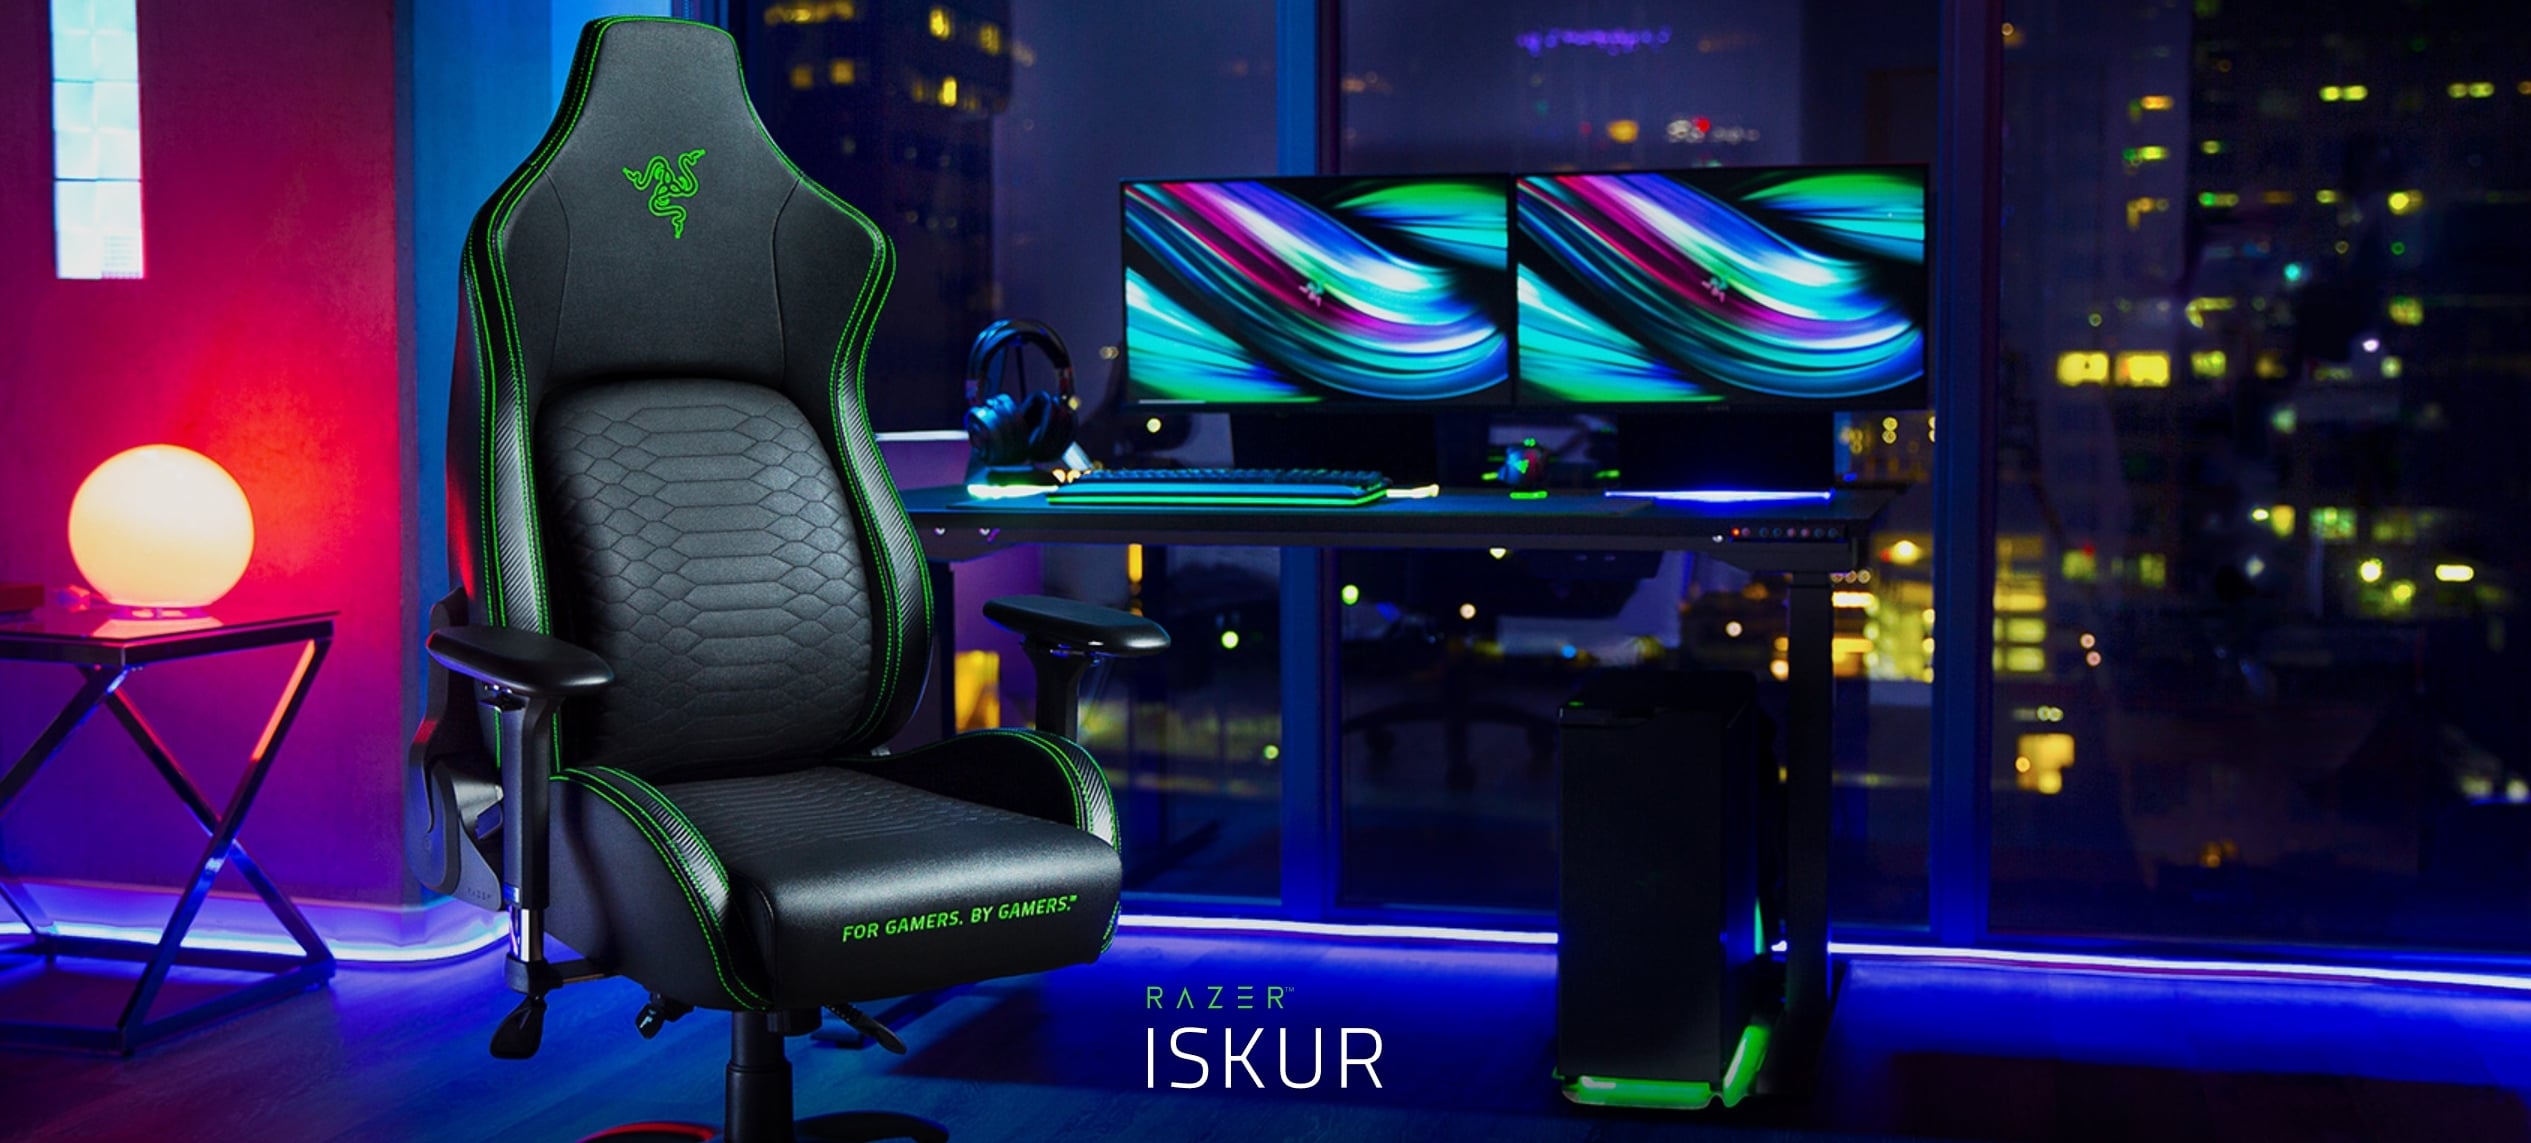 If you appreciate your back, we present you the Razer Iskur gaming chair